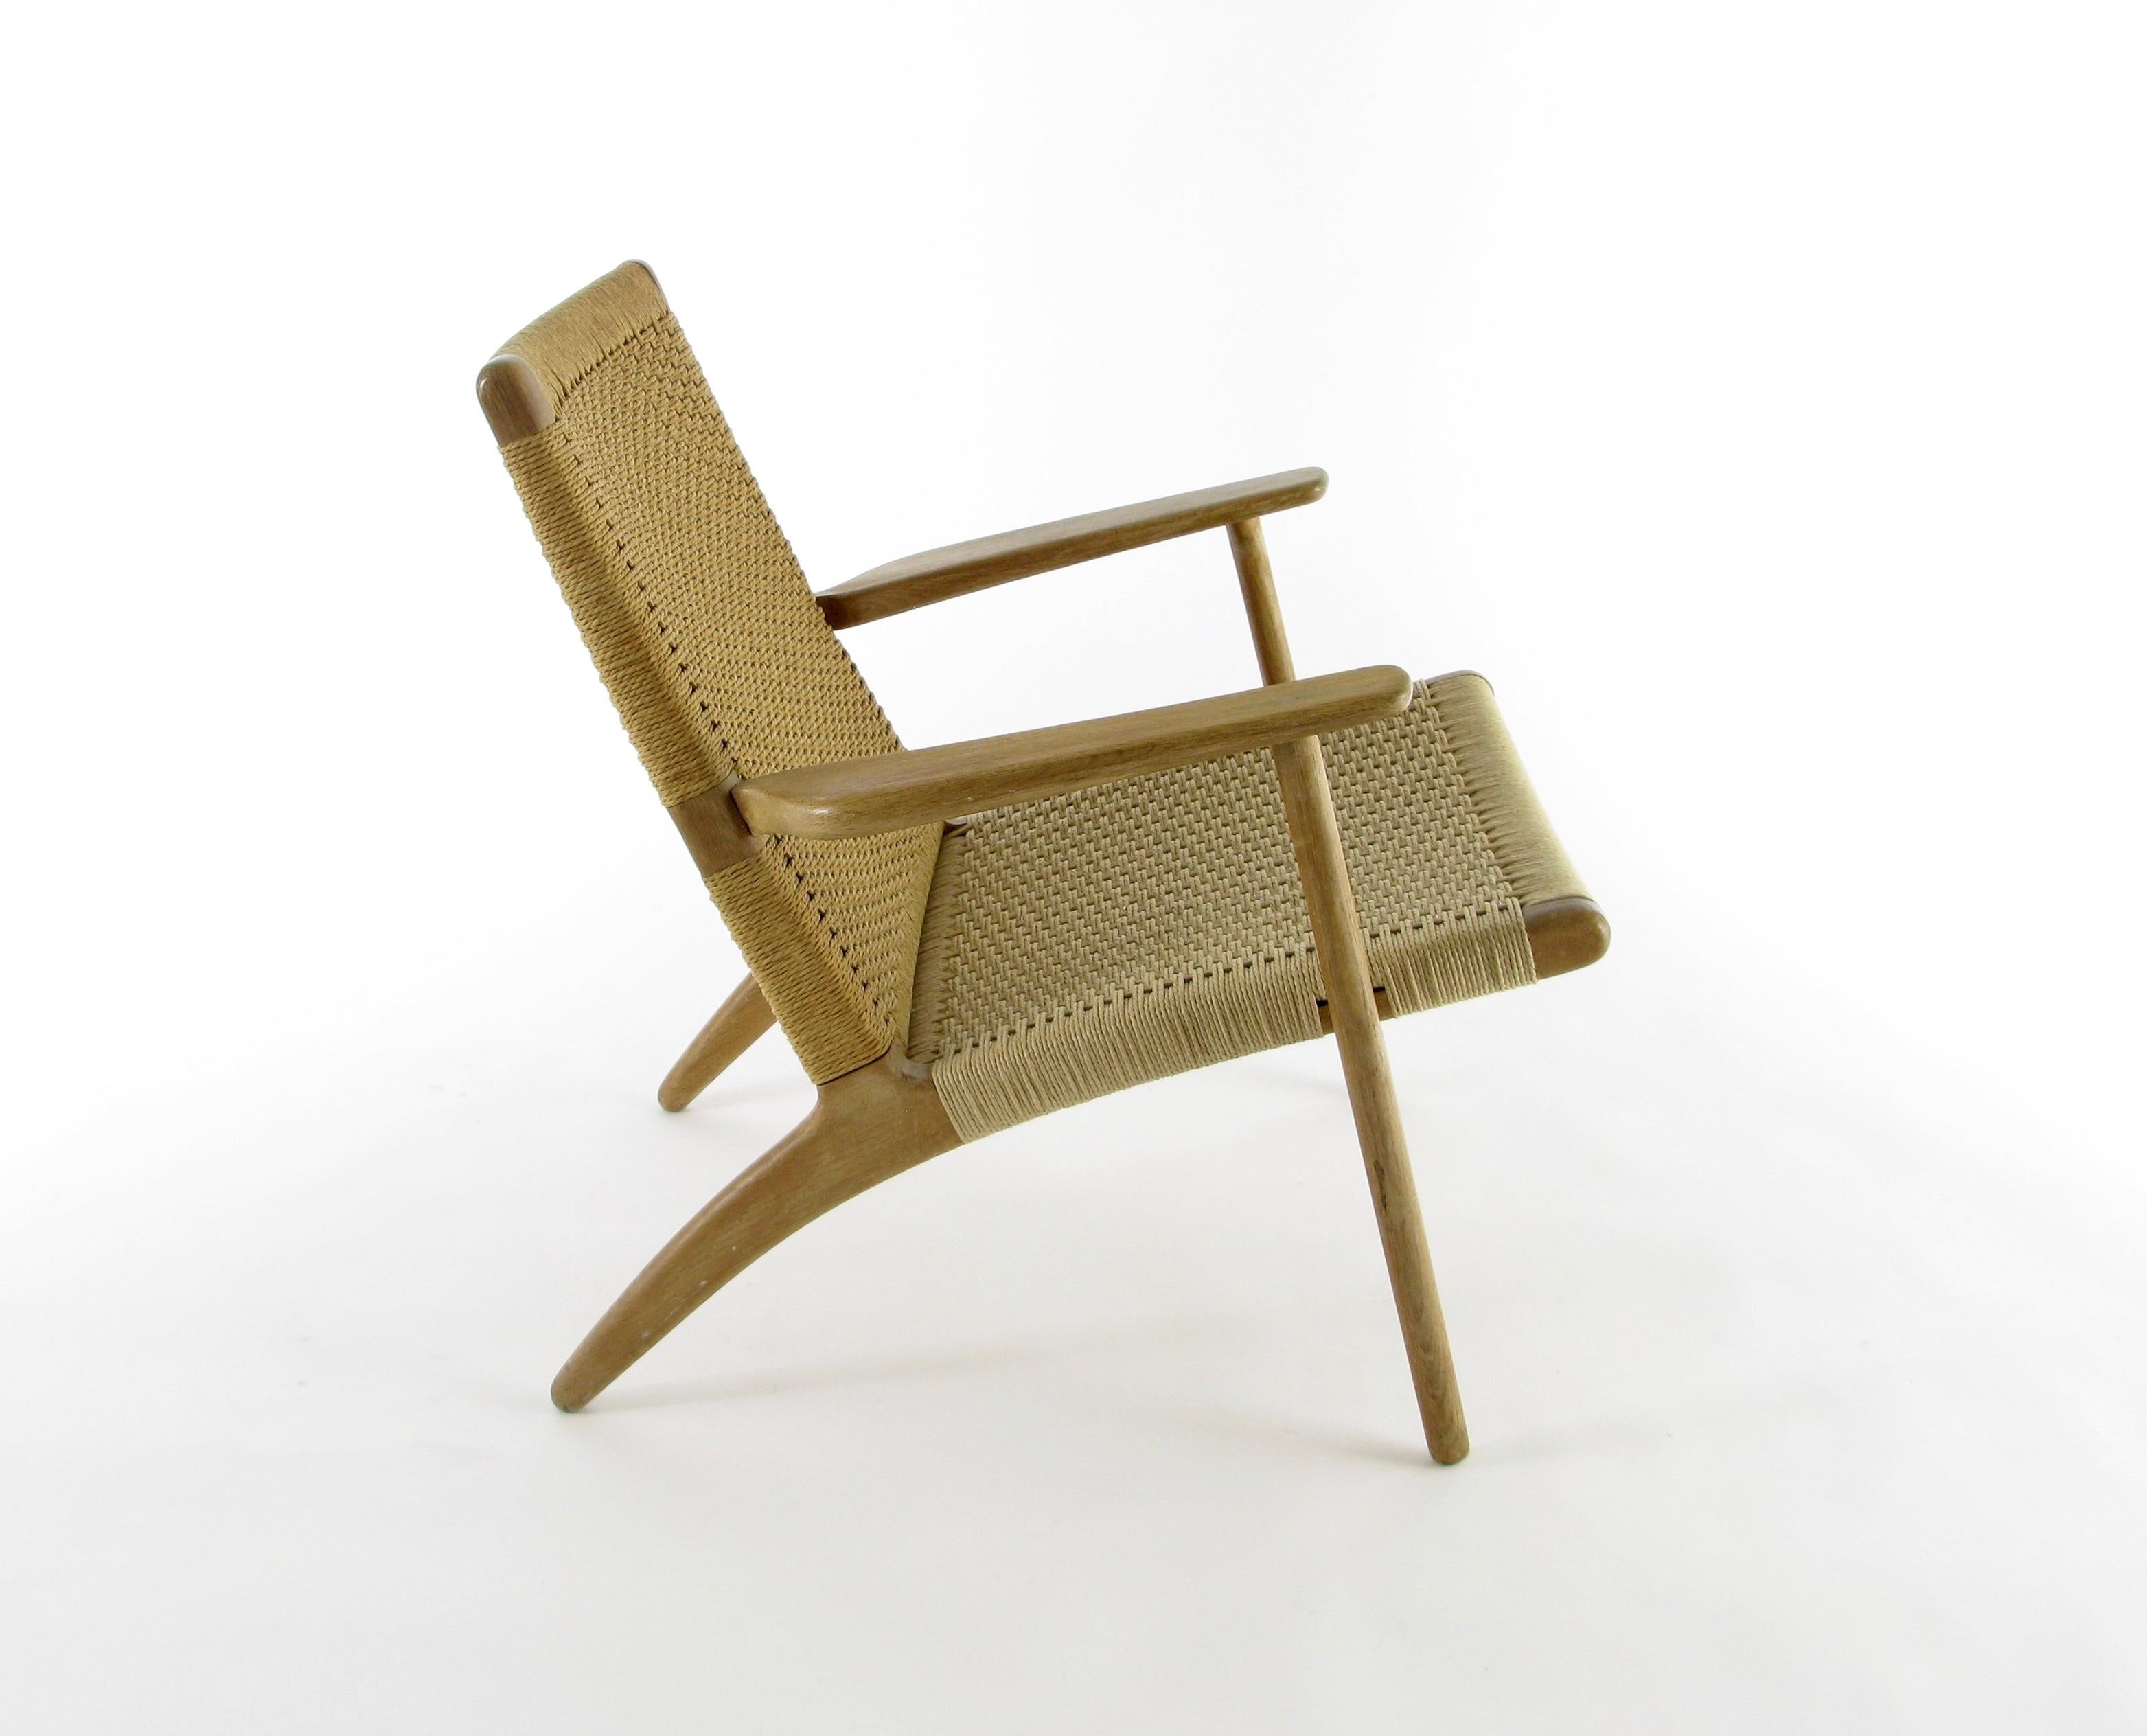 Hans Wegner for Carl Hansen & Son CH 25 lounge chair, circa 1950. Early model in very good condition, marked on underside with Danish maker's label. Frame made in oiled oak. New papercord seat and back restored to exacting standards as the original.